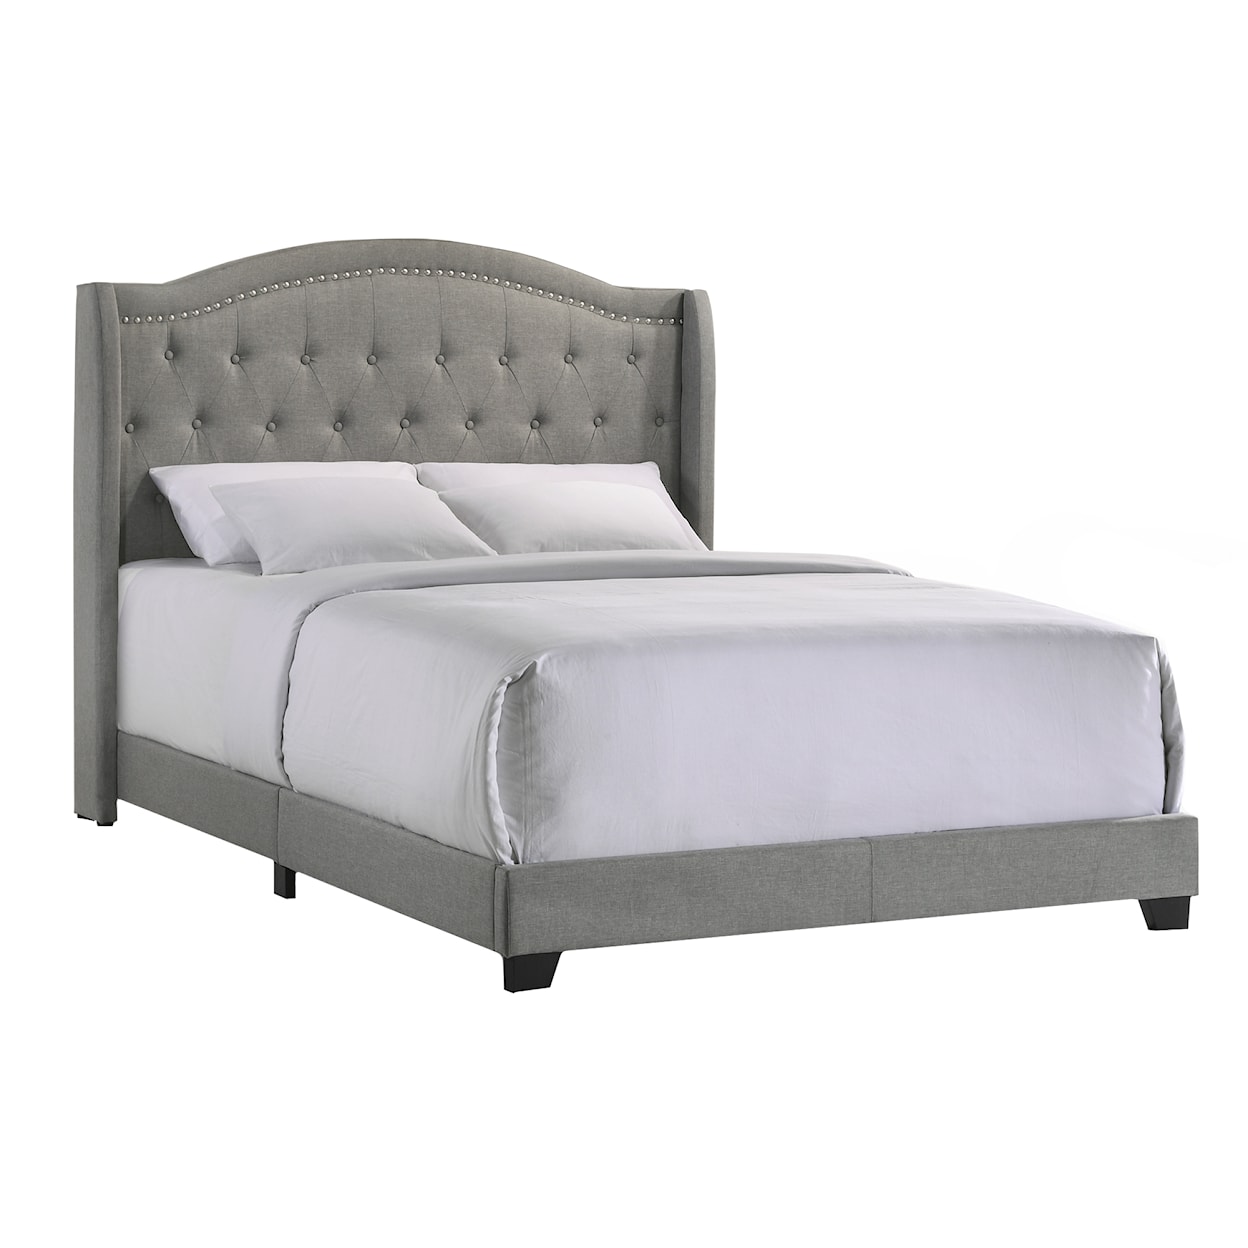 VFM Signature Upholstered Beds Rhyan Queen Upholstered Bed